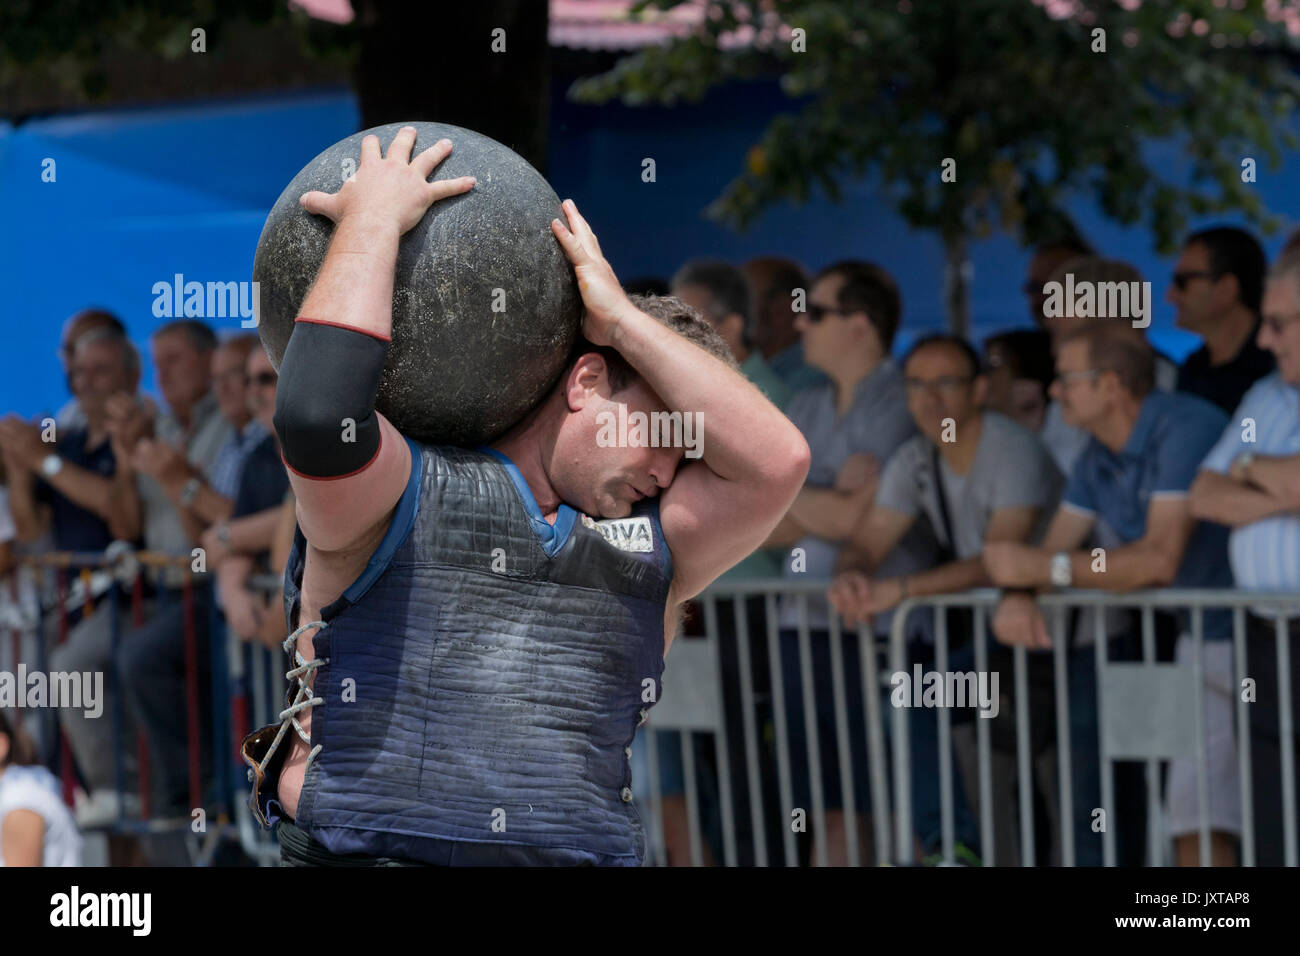 Huge round stone on the shoulders of a basque stone lifter (harrijasotzaile) in a competition. Stock Photo